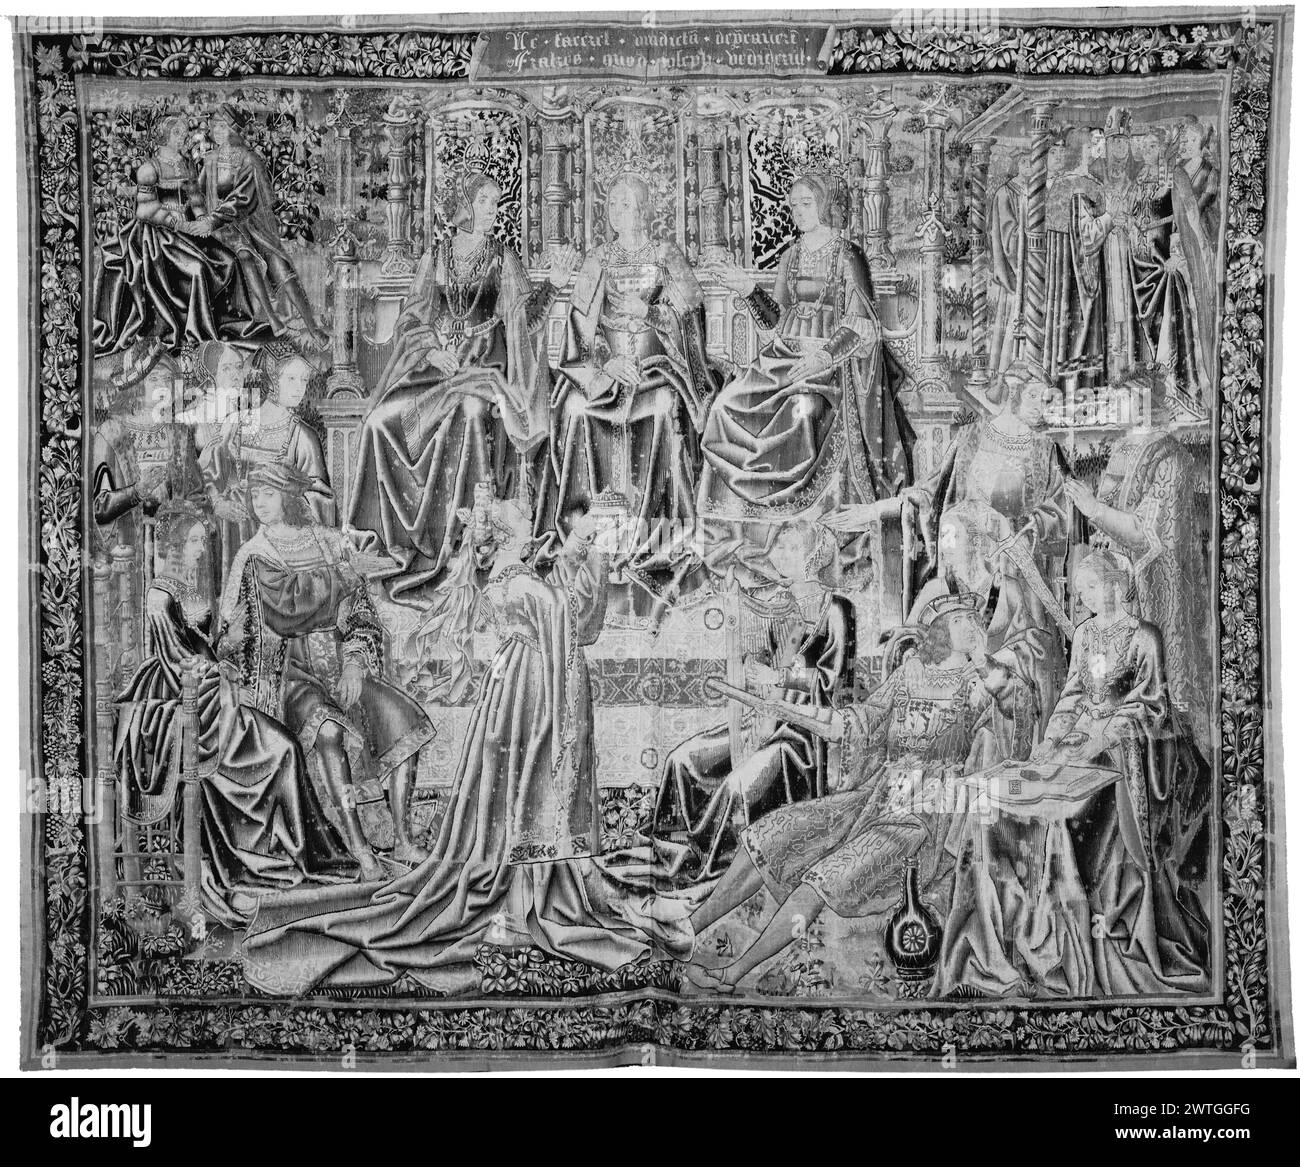 Court scene with lovers and wedding. unknown c. 1500-1525 Tapestry Dimensions: H 10'8' x W 13'4' Tapestry Materials/Techniques: unknown Culture: Southern Netherlands Weaving Center: unknown Ownership History: French & Co. purchased from The Cleveland Museum of Art, received 1/24/1961; sold to V. [Vigo] Sternberg 6/17/1963. Inscriptions: Inscription in upper border: NE / FACERET / VINDICTA[M] / DEP[RE]CAVER[UN]T m(?) / FRATRES QUOD / JOSEPH / [UM]VE[N] DIDERU[N]T Stock Photo